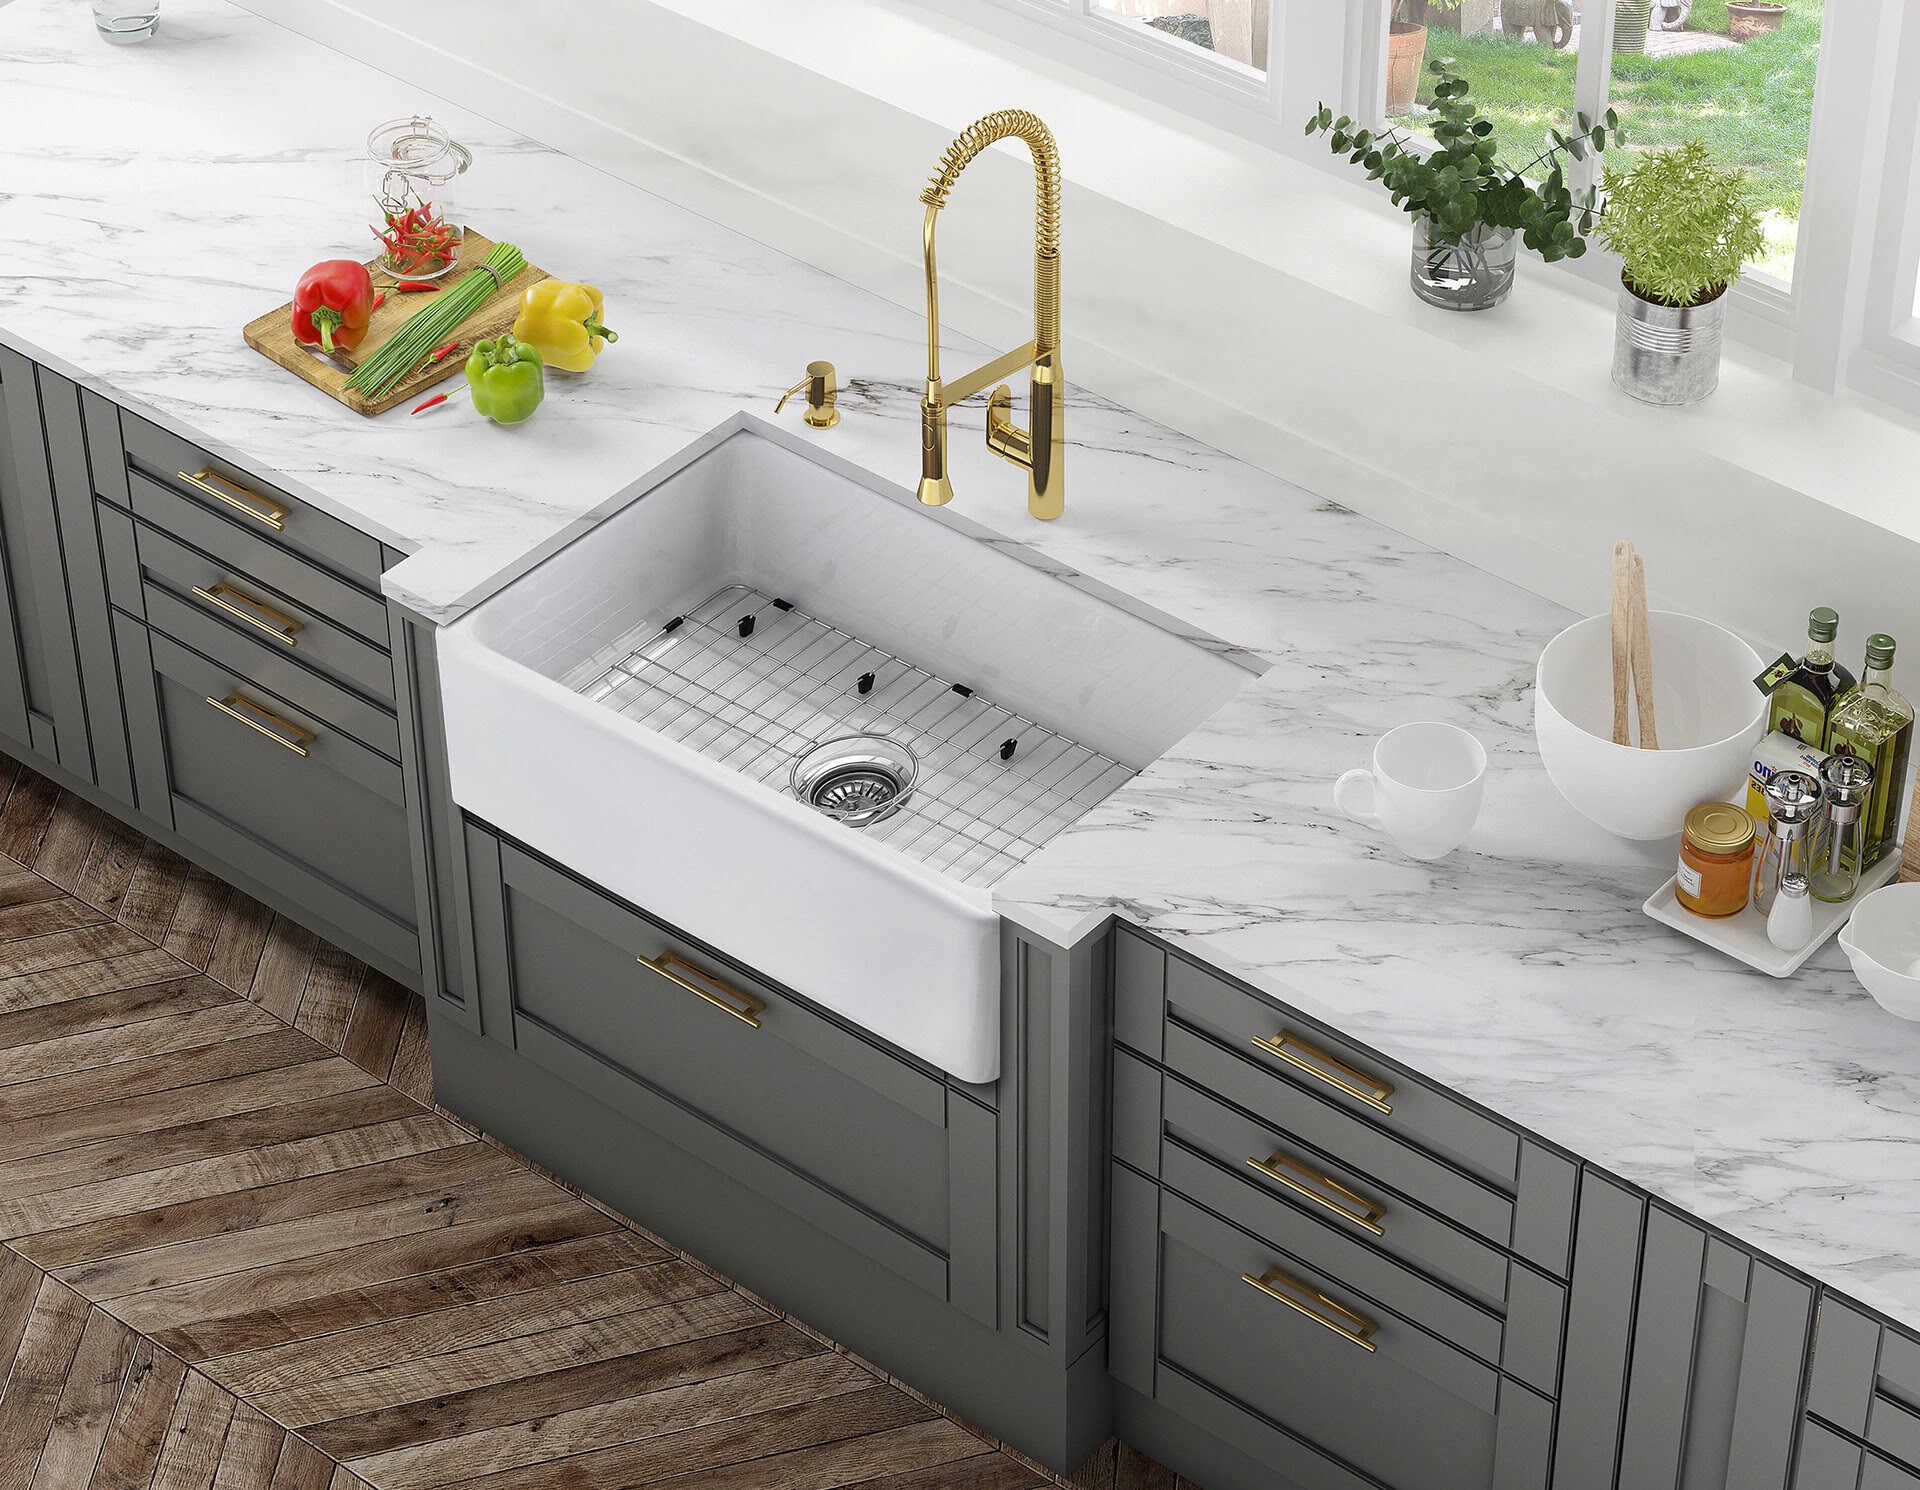 How To Install Farmhouse Sink